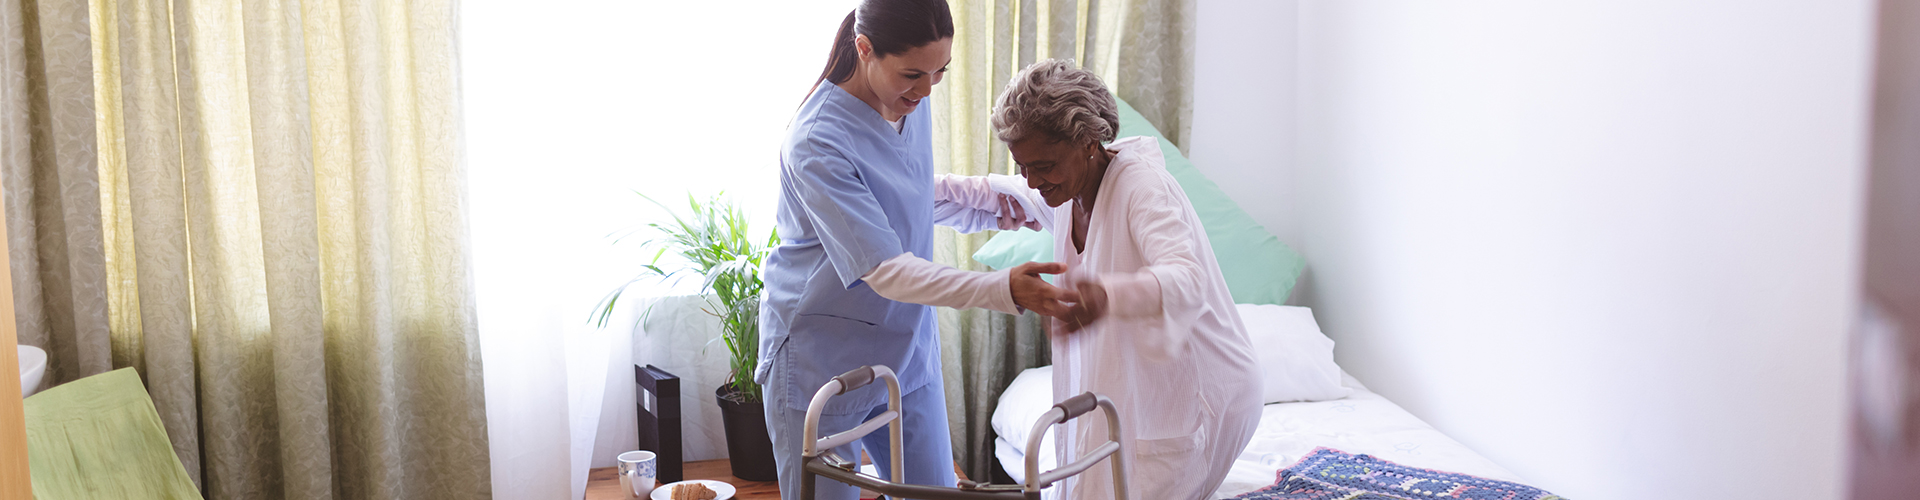 caretaker helping elder lady stand from bed